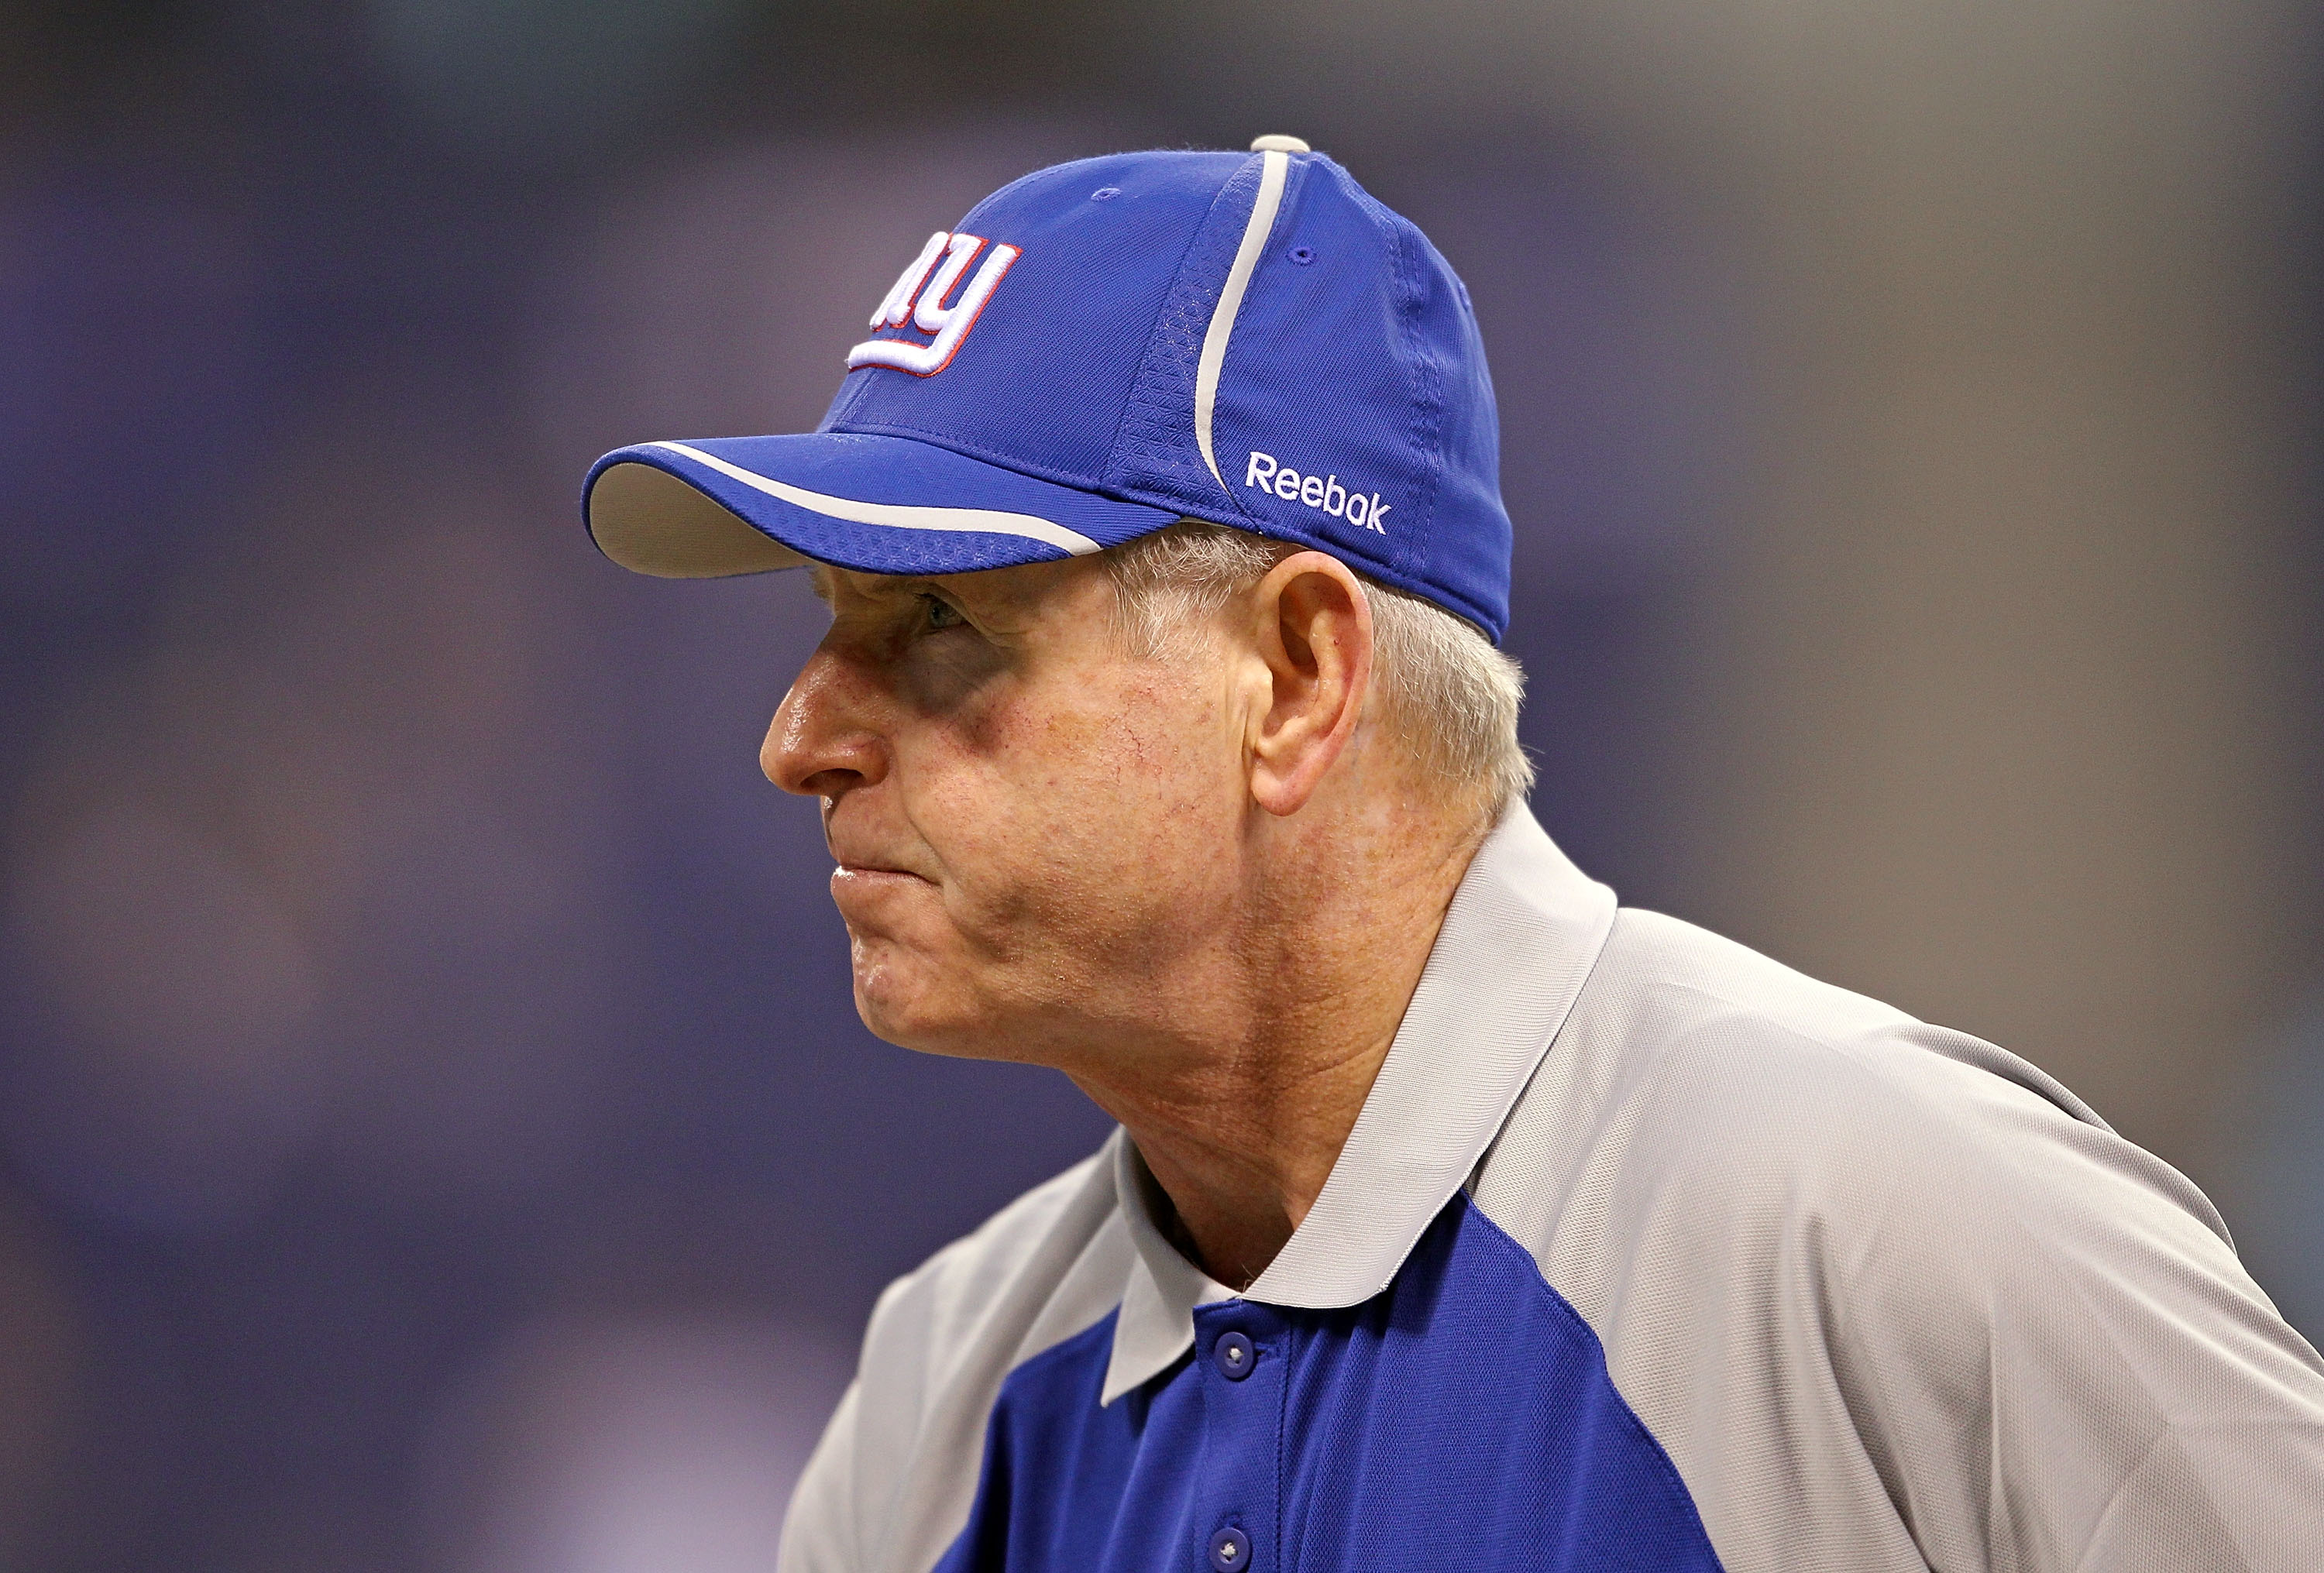 INDIANAPOLIS - SEPTEMBER 19:  Tom Coughlin the Head Coach of the New York Giants is pictured during the NFL game against the Indianapolis Colts at Lucas Oil Stadium on September 19, 2010 in Indianapolis, Indiana.  (Photo by Andy Lyons/Getty Images)